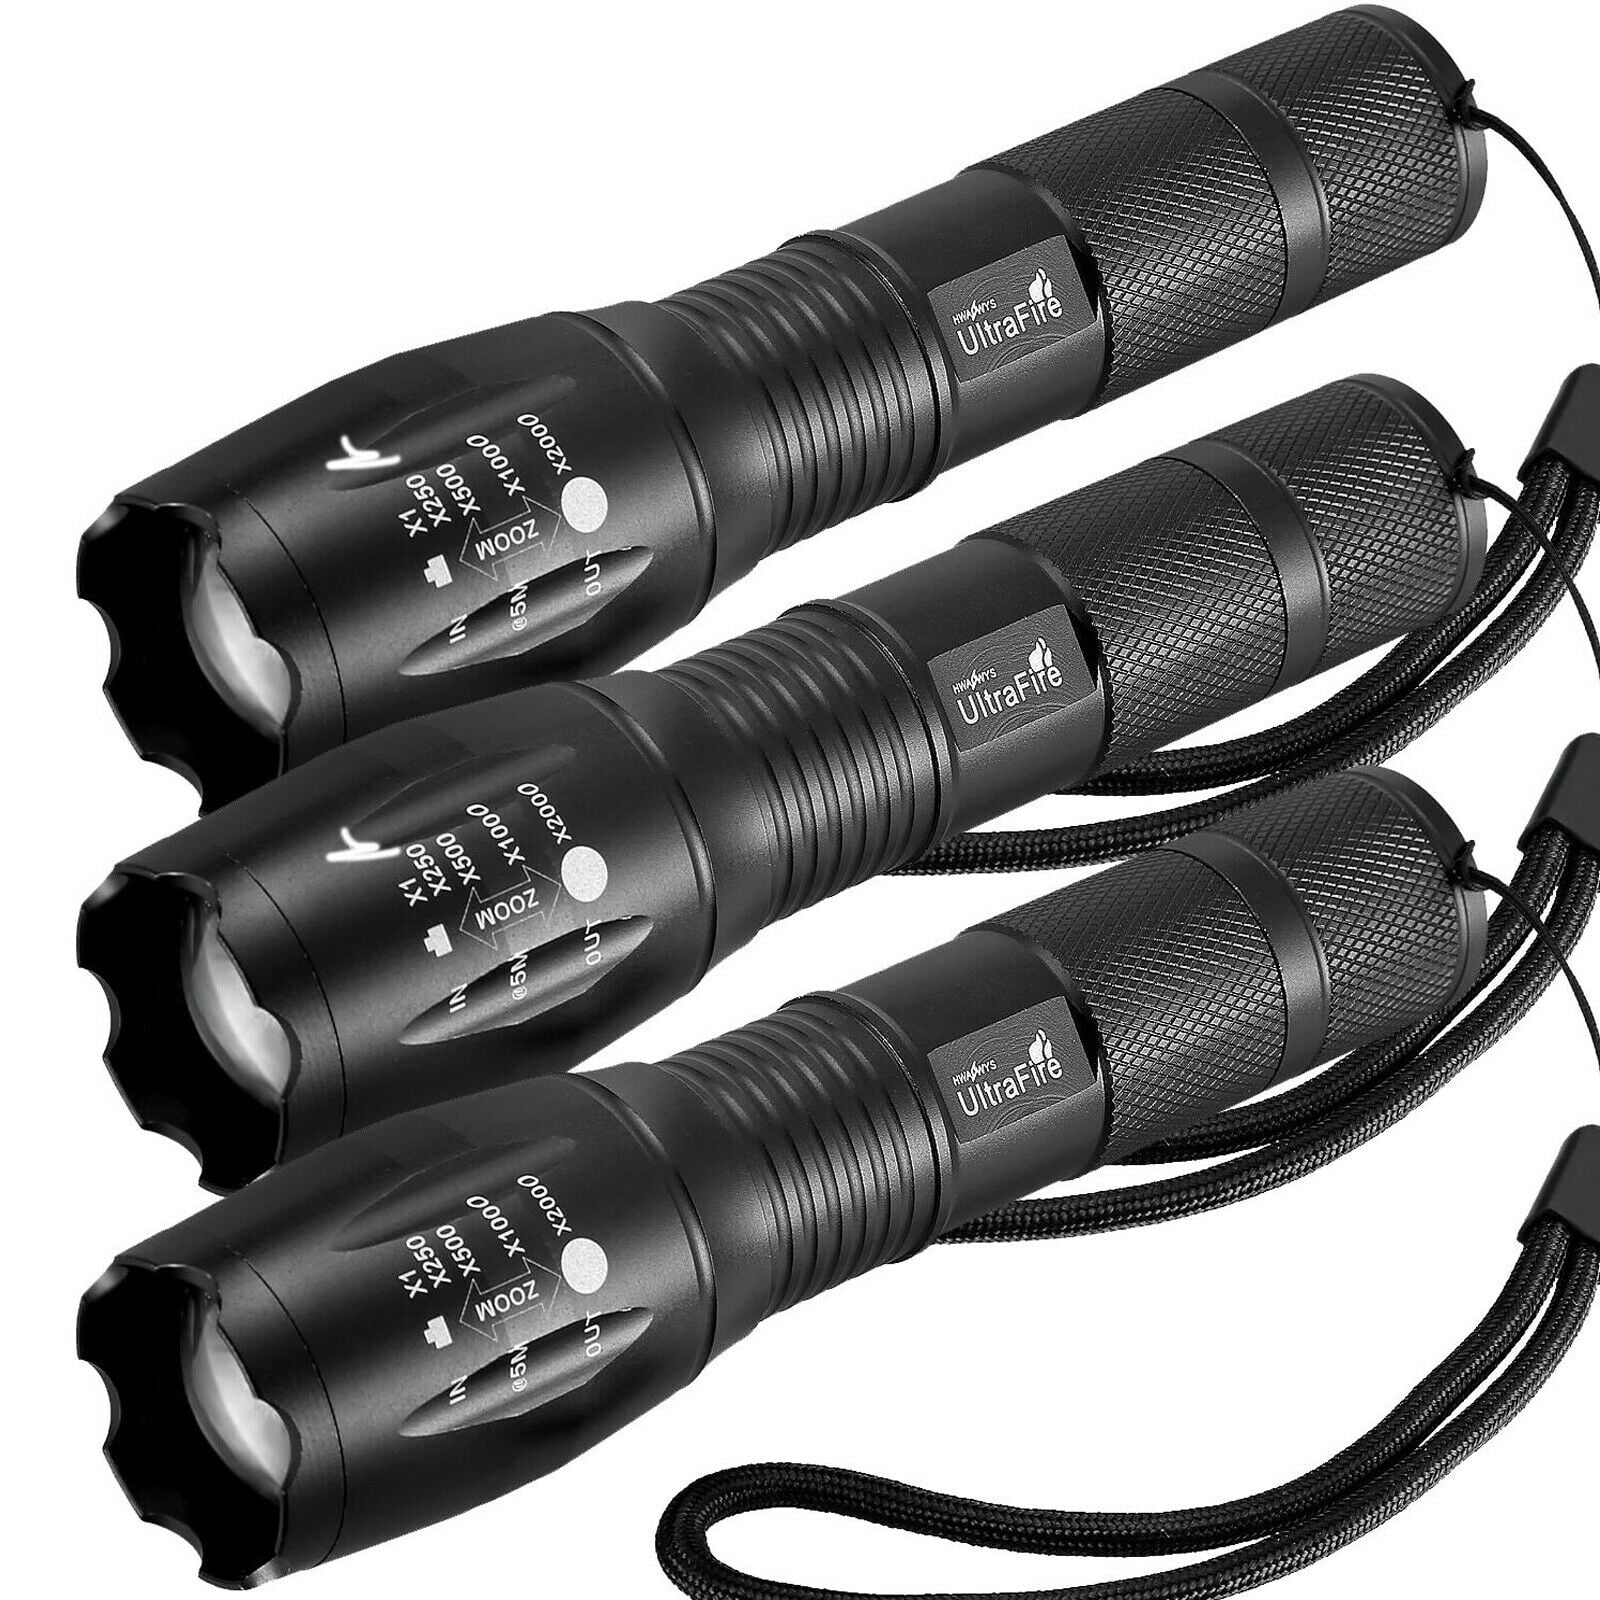 Tactical 18650 Flashlight  LED High Powered 5Modes Zoomable Aluminum 